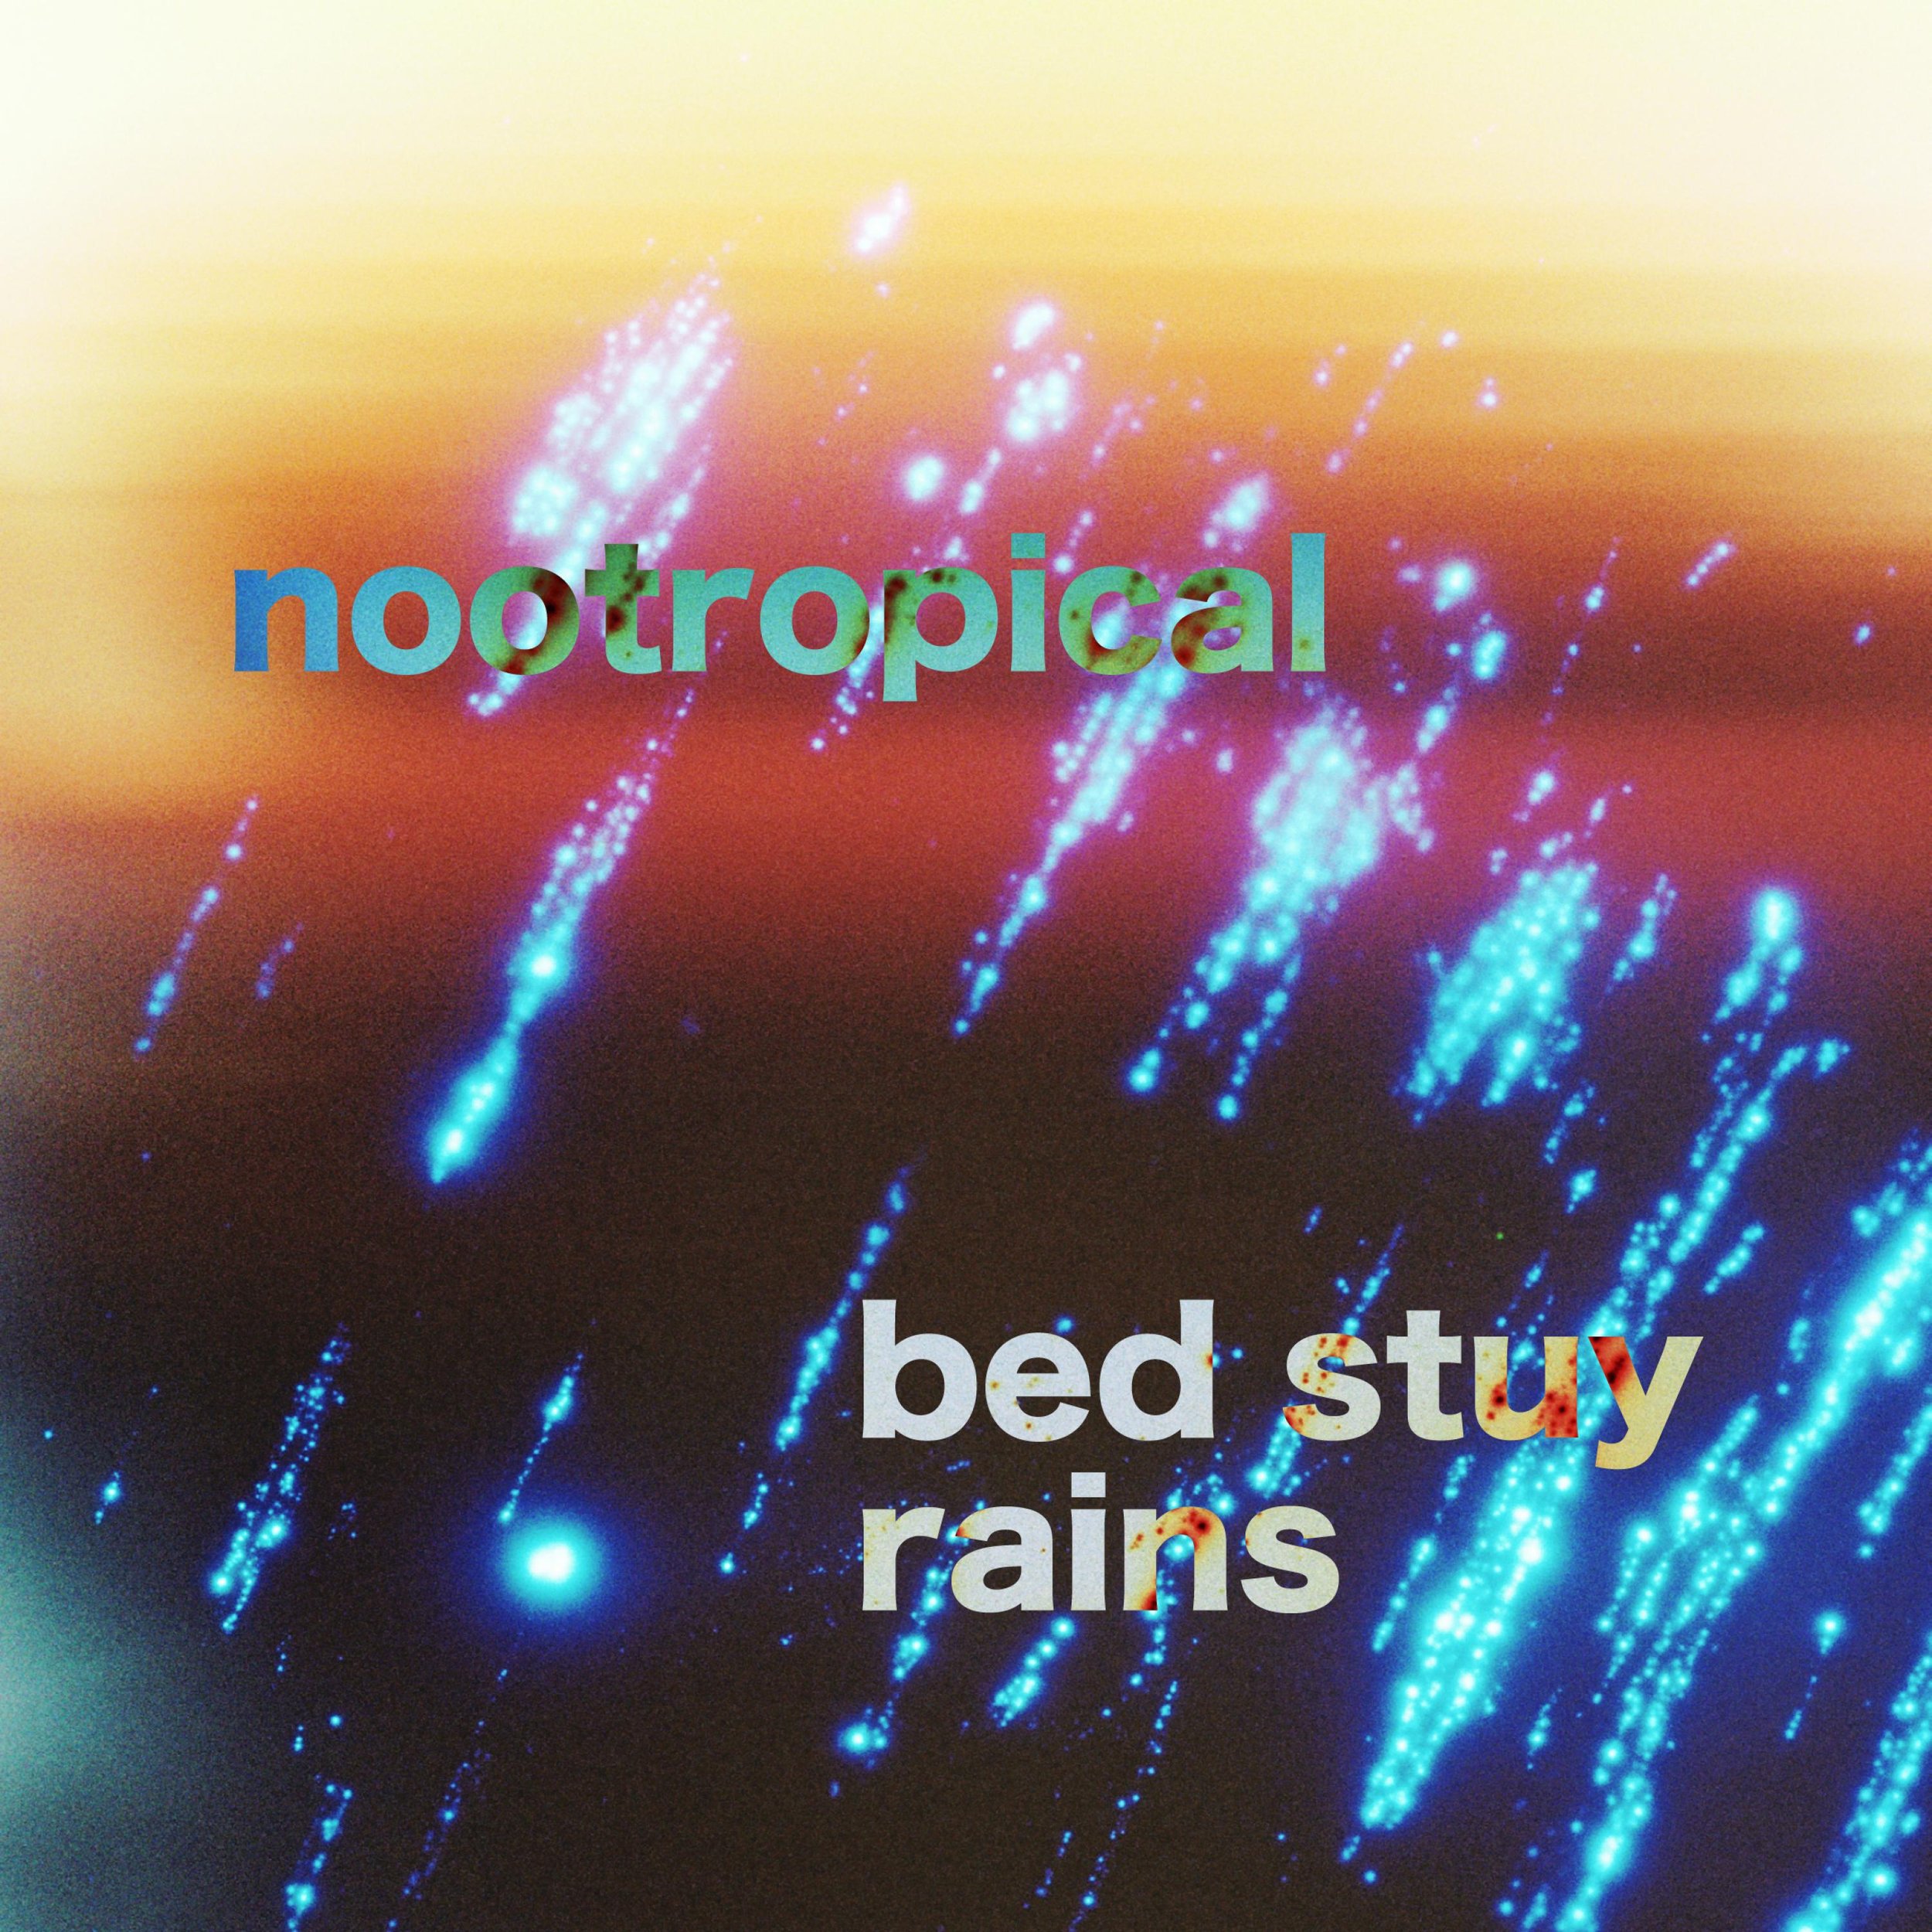 nootropical - bed stuy rains